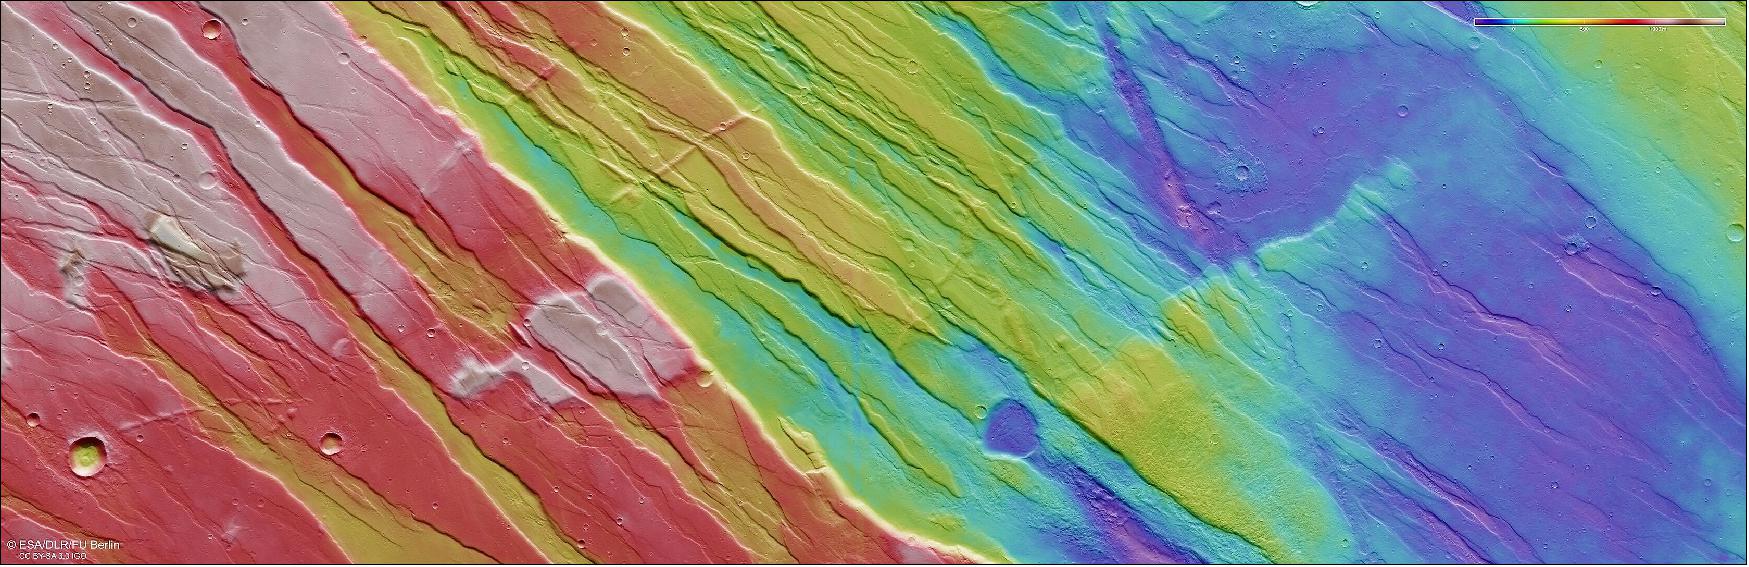 Figure 91: Topographic view of Tempe Fossae on Mars. This color-coded topographic image shows part of Mars’ surface located northeast of the Tharsis volcanic province, based on data gathered by the Mars Express High Resolution Stereo Camera on 30 September 2019 during orbit 19913. This is a portion of Tempe Fossae – a series of tectonic faults that cuts across Tempe Terra in Mars’ northern highlands. This view is based on a digital terrain model (DTM) of the region, from which the topography of the landscape can be derived; lower parts of the surface are shown in blues and purples, while higher altitude regions show up in whites, yellows and reds, as indicated on the scale to the top right. North is to the right (image credit: ESA/DLR/FU Berlin, CC BY-SA 3.0 IGO)